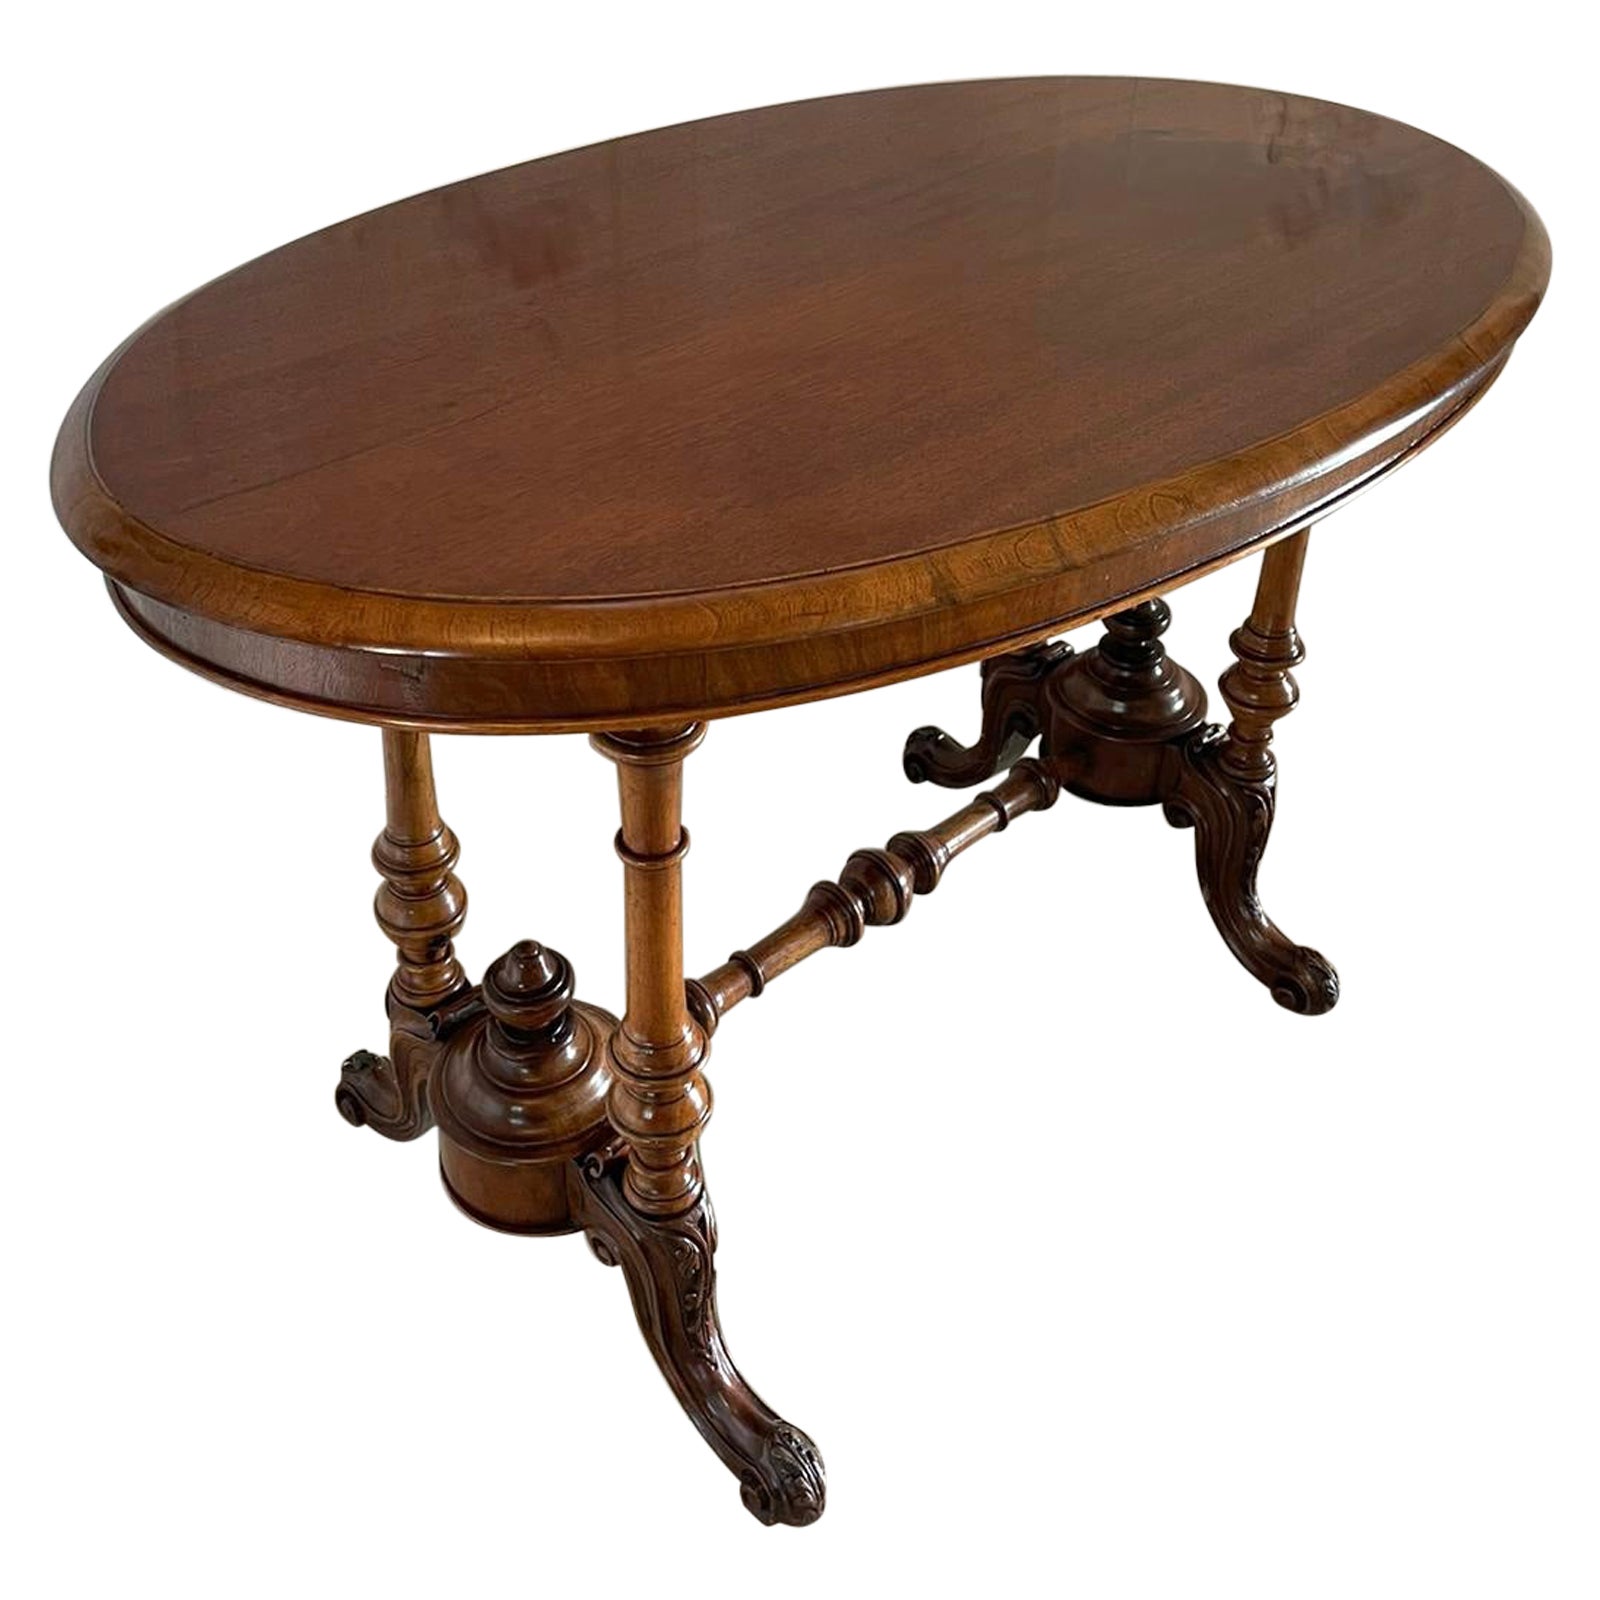  Antique 19th Century Victorian Oval Walnut Centre Table